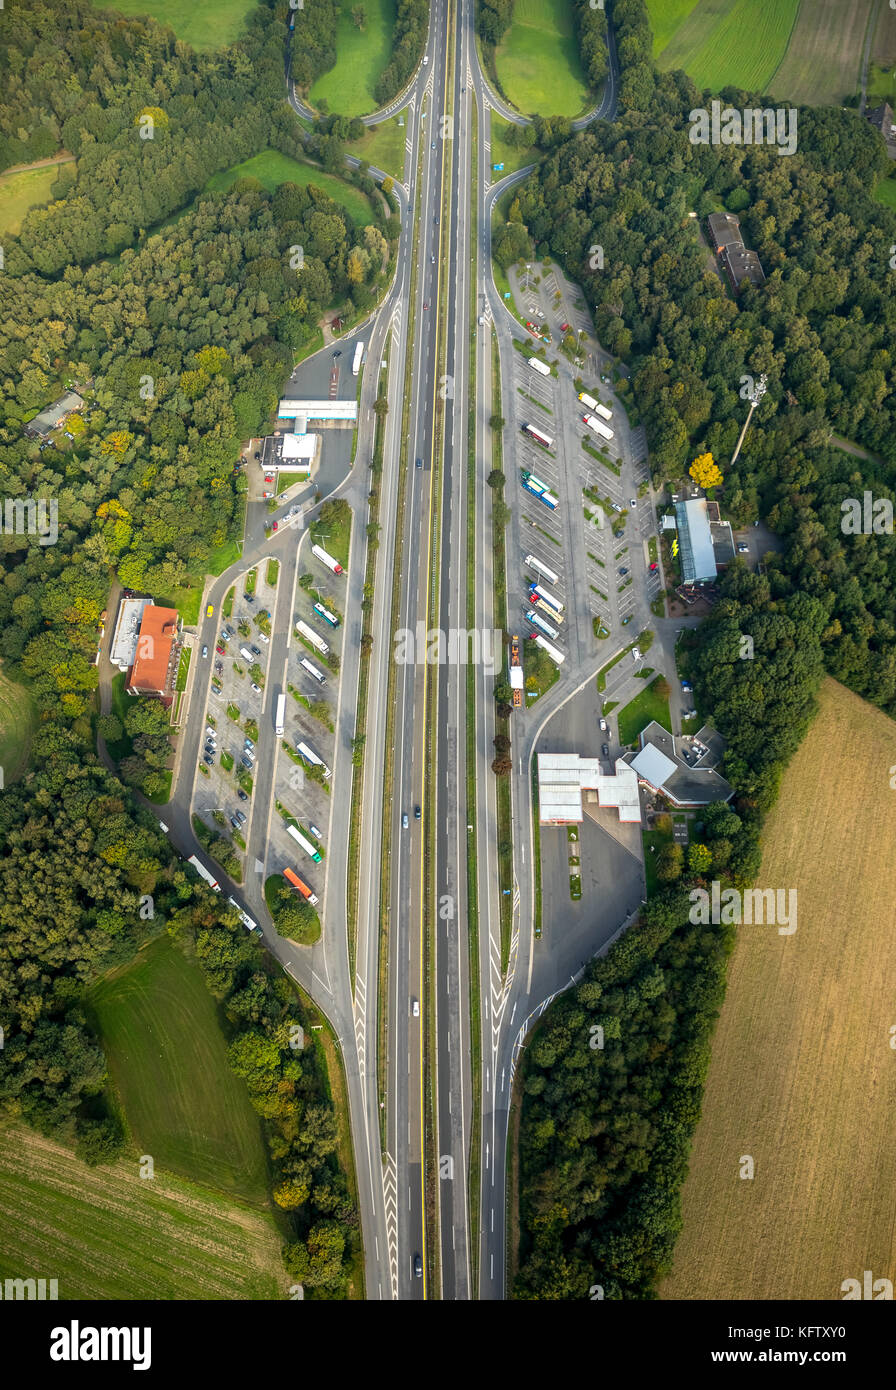 Highway A3, service area Hünxe East and West, service station, Hünxe, Hünxe, Ruhr area, Lower Rhine, Germany, Europe, Hünxe, Krudenburg, aerial view,  Stock Photo